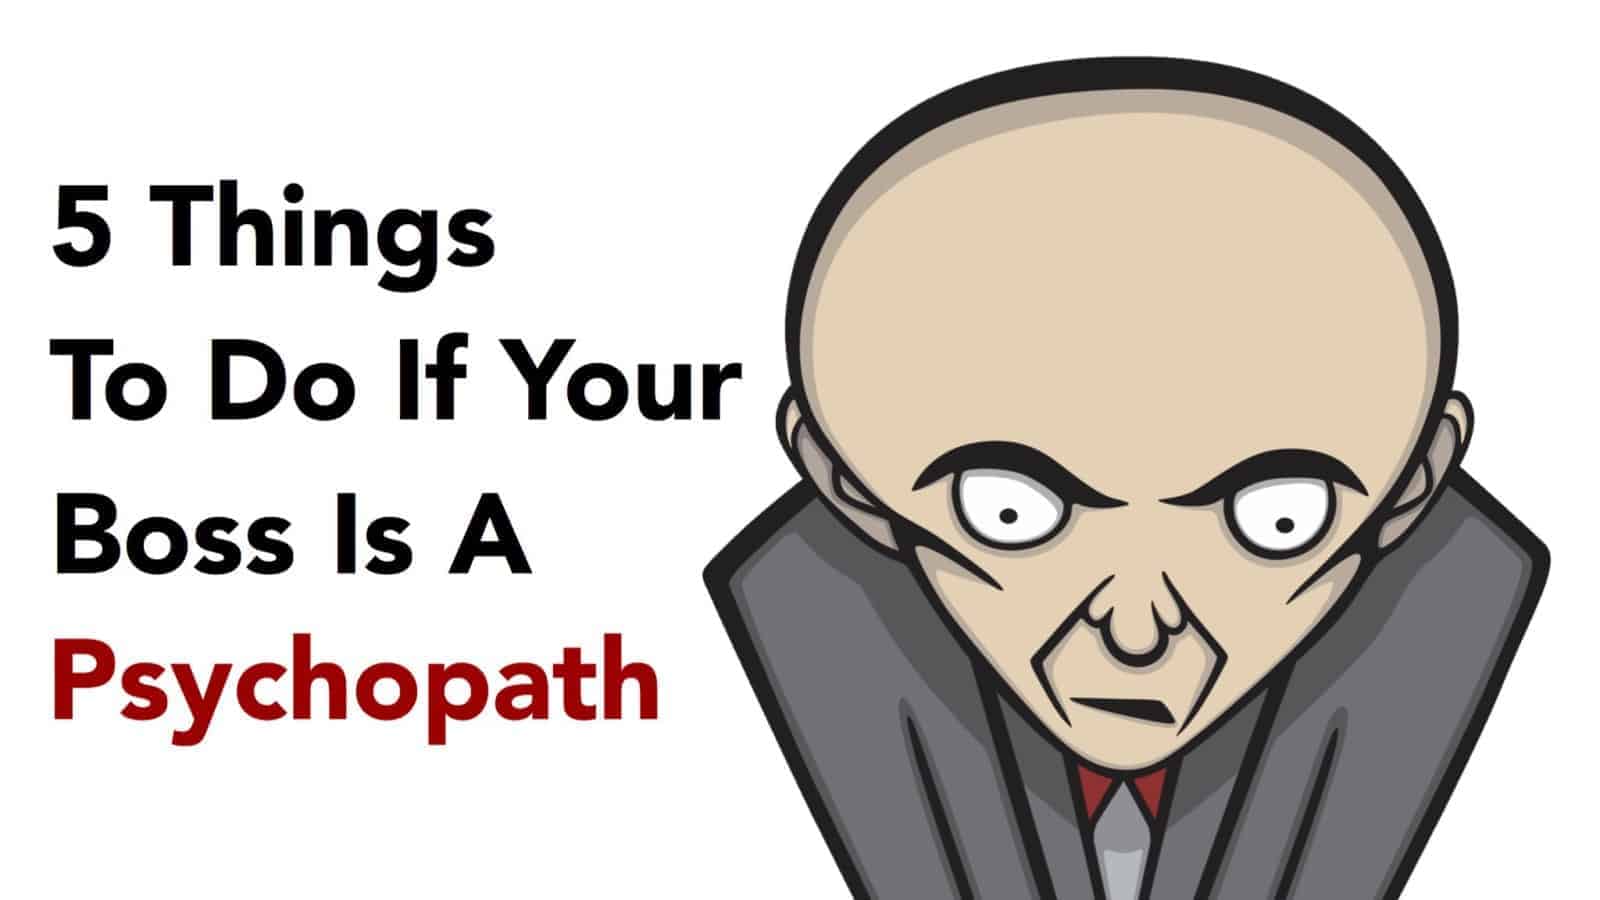 5 Things To Do If Your Boss Is A Psychopath